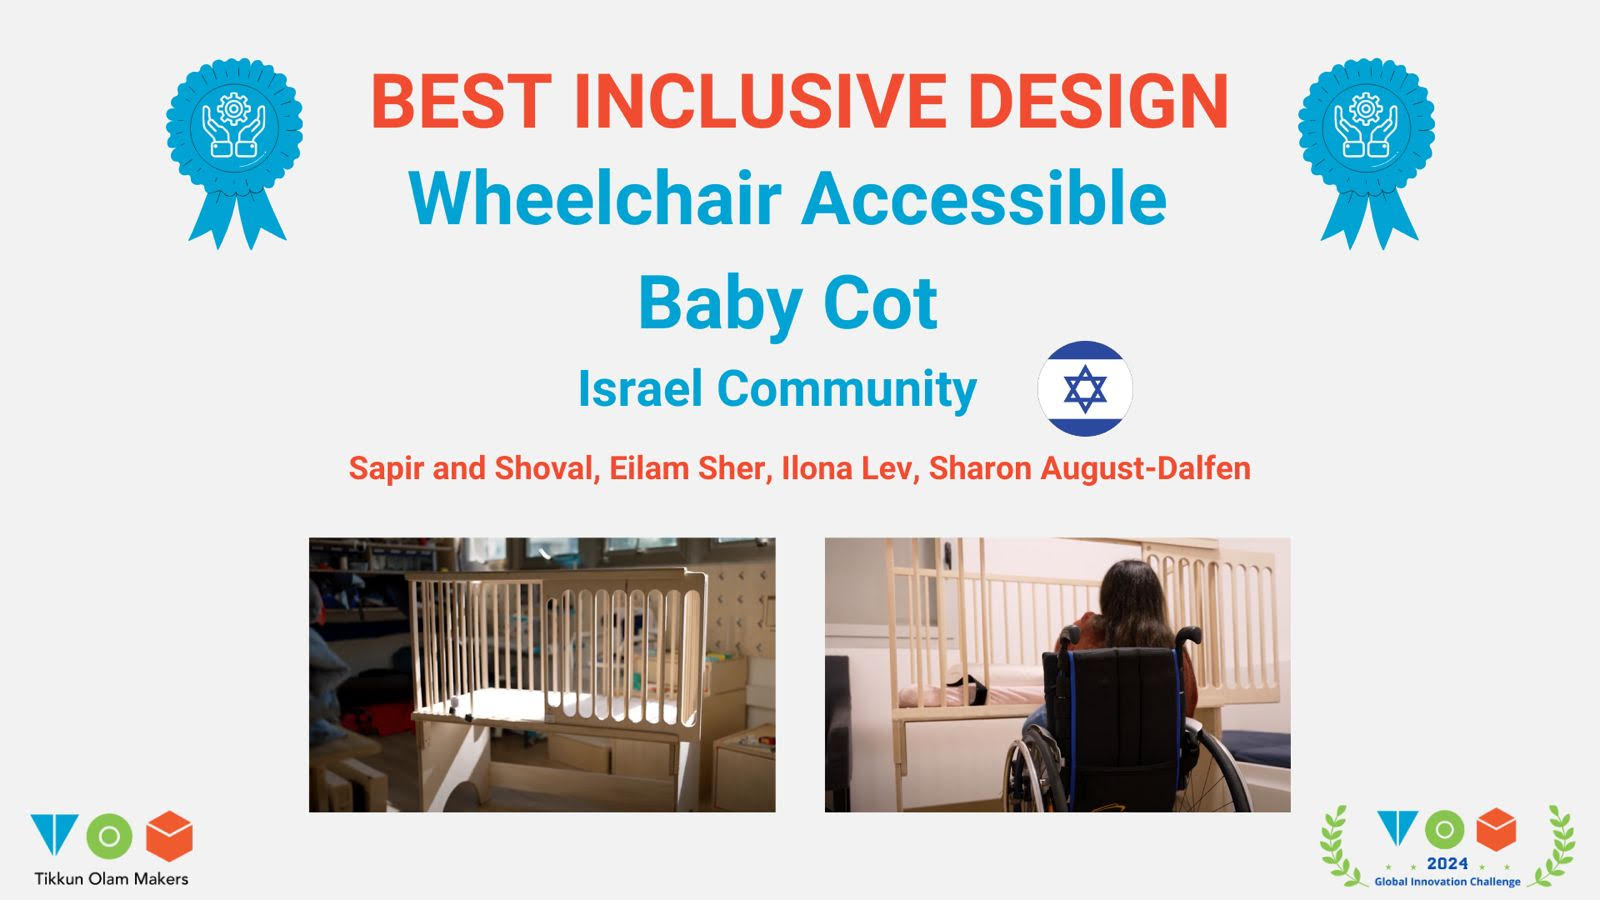 The ''Wheelchair Accessible Baby Cot'' project, developed by, Ilona Lev, won the award for best overall design